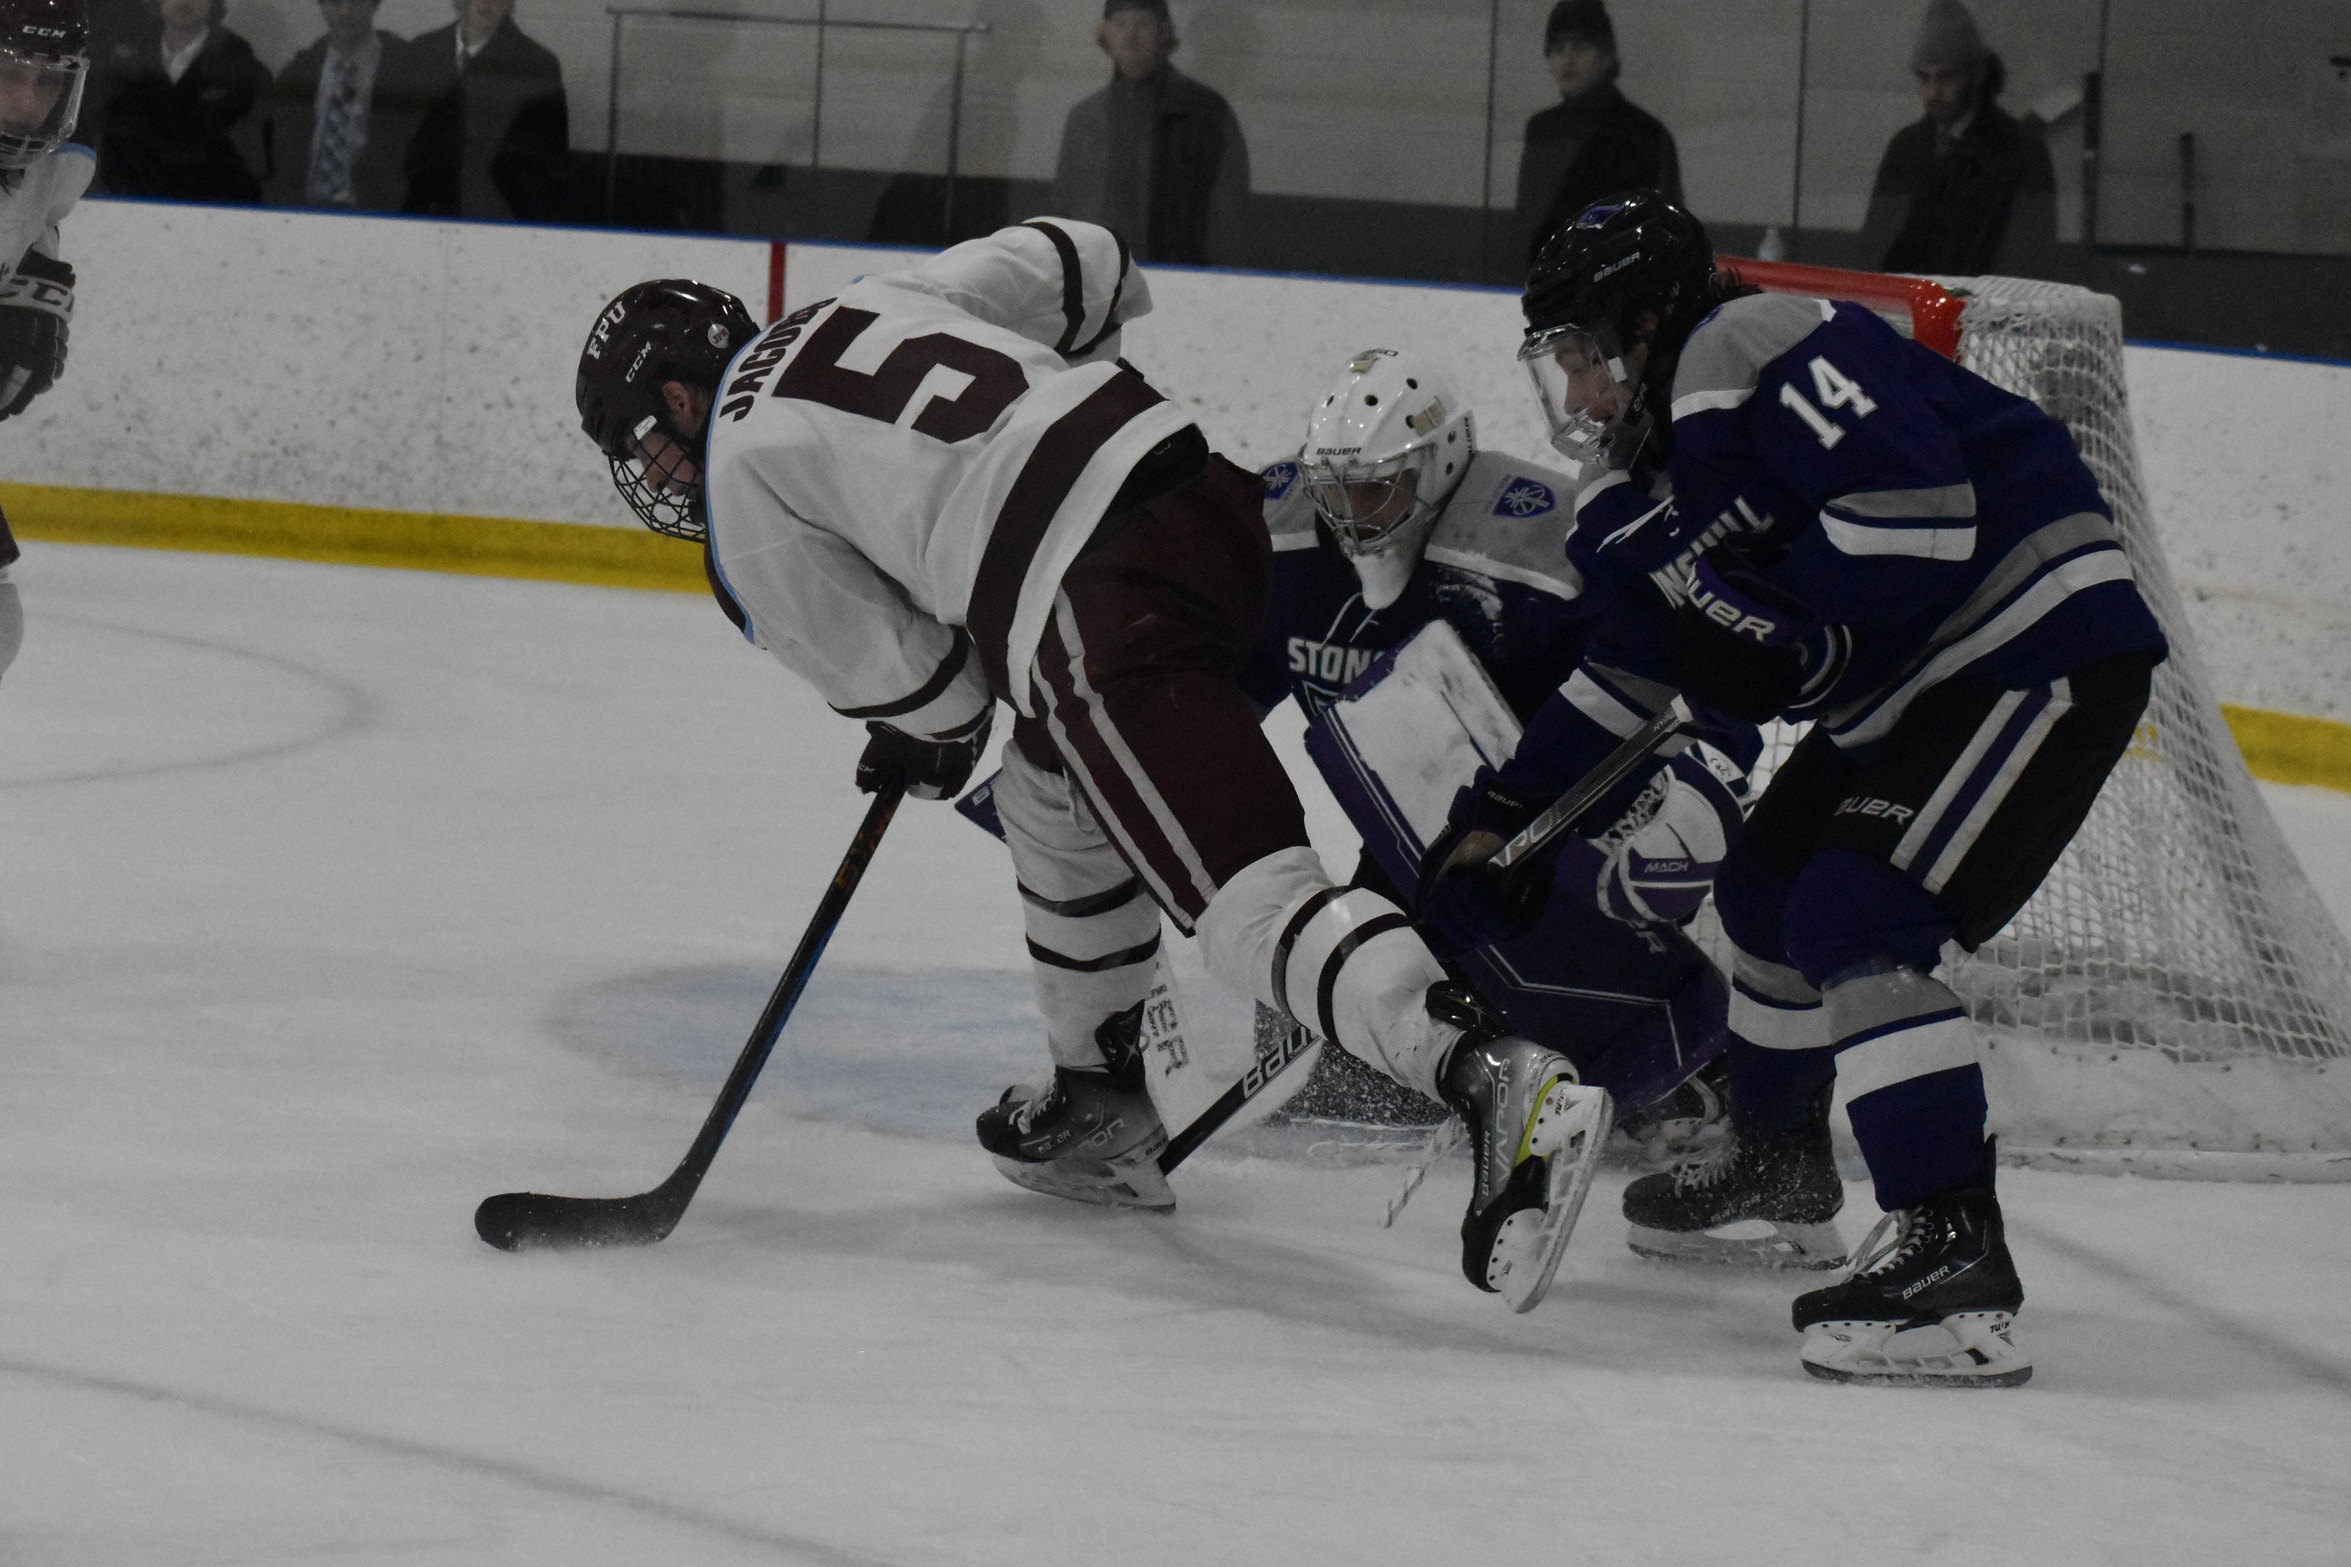 Jacobs' Third Period Pair Leads Men's Hockey to 4-3 Win over Post University